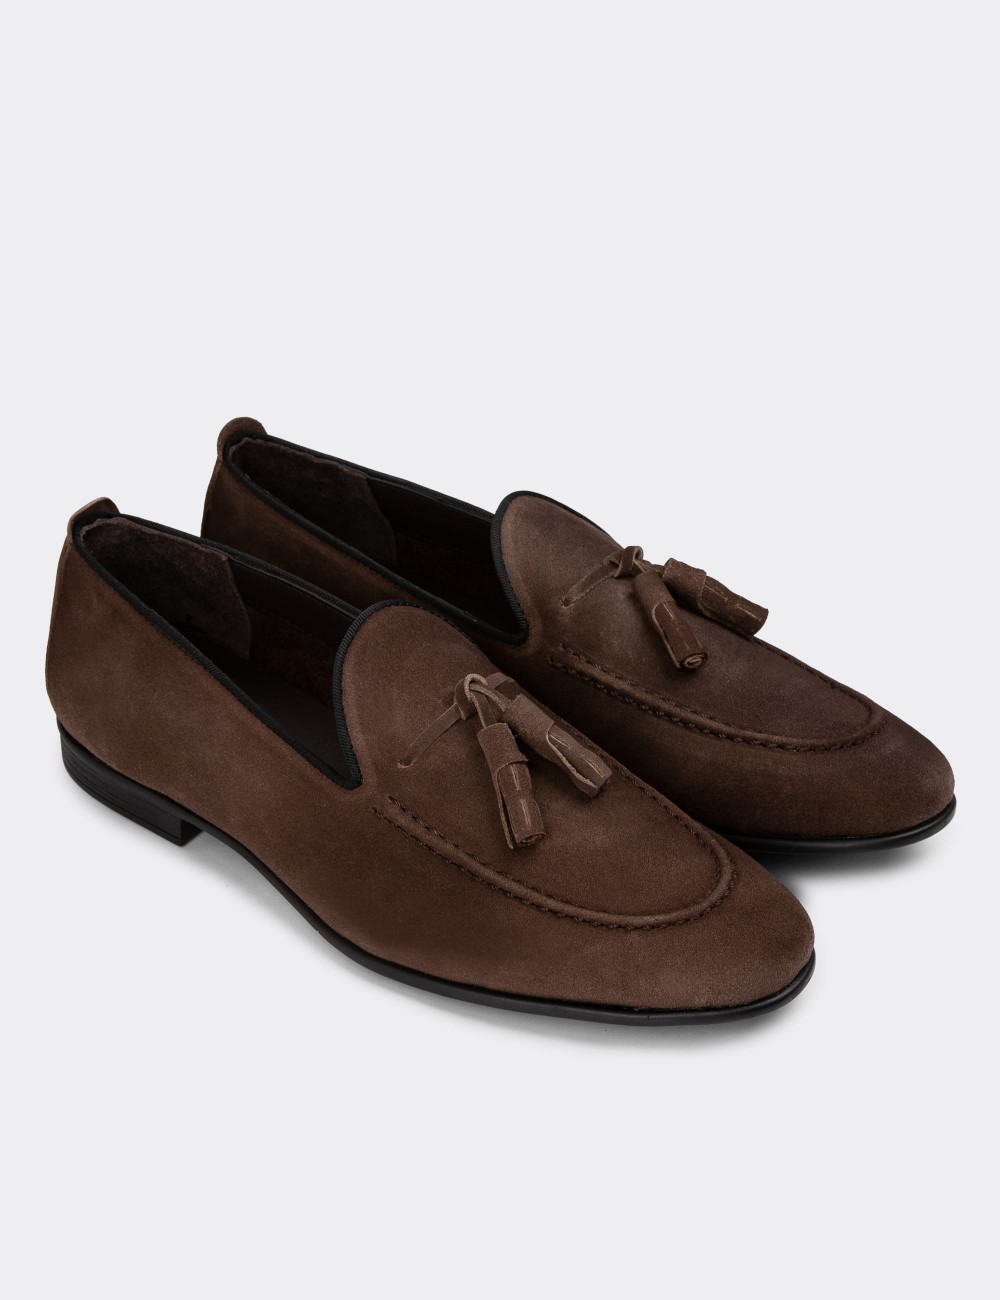 Brown Suede Leather Loafers - 01701MKHVC91